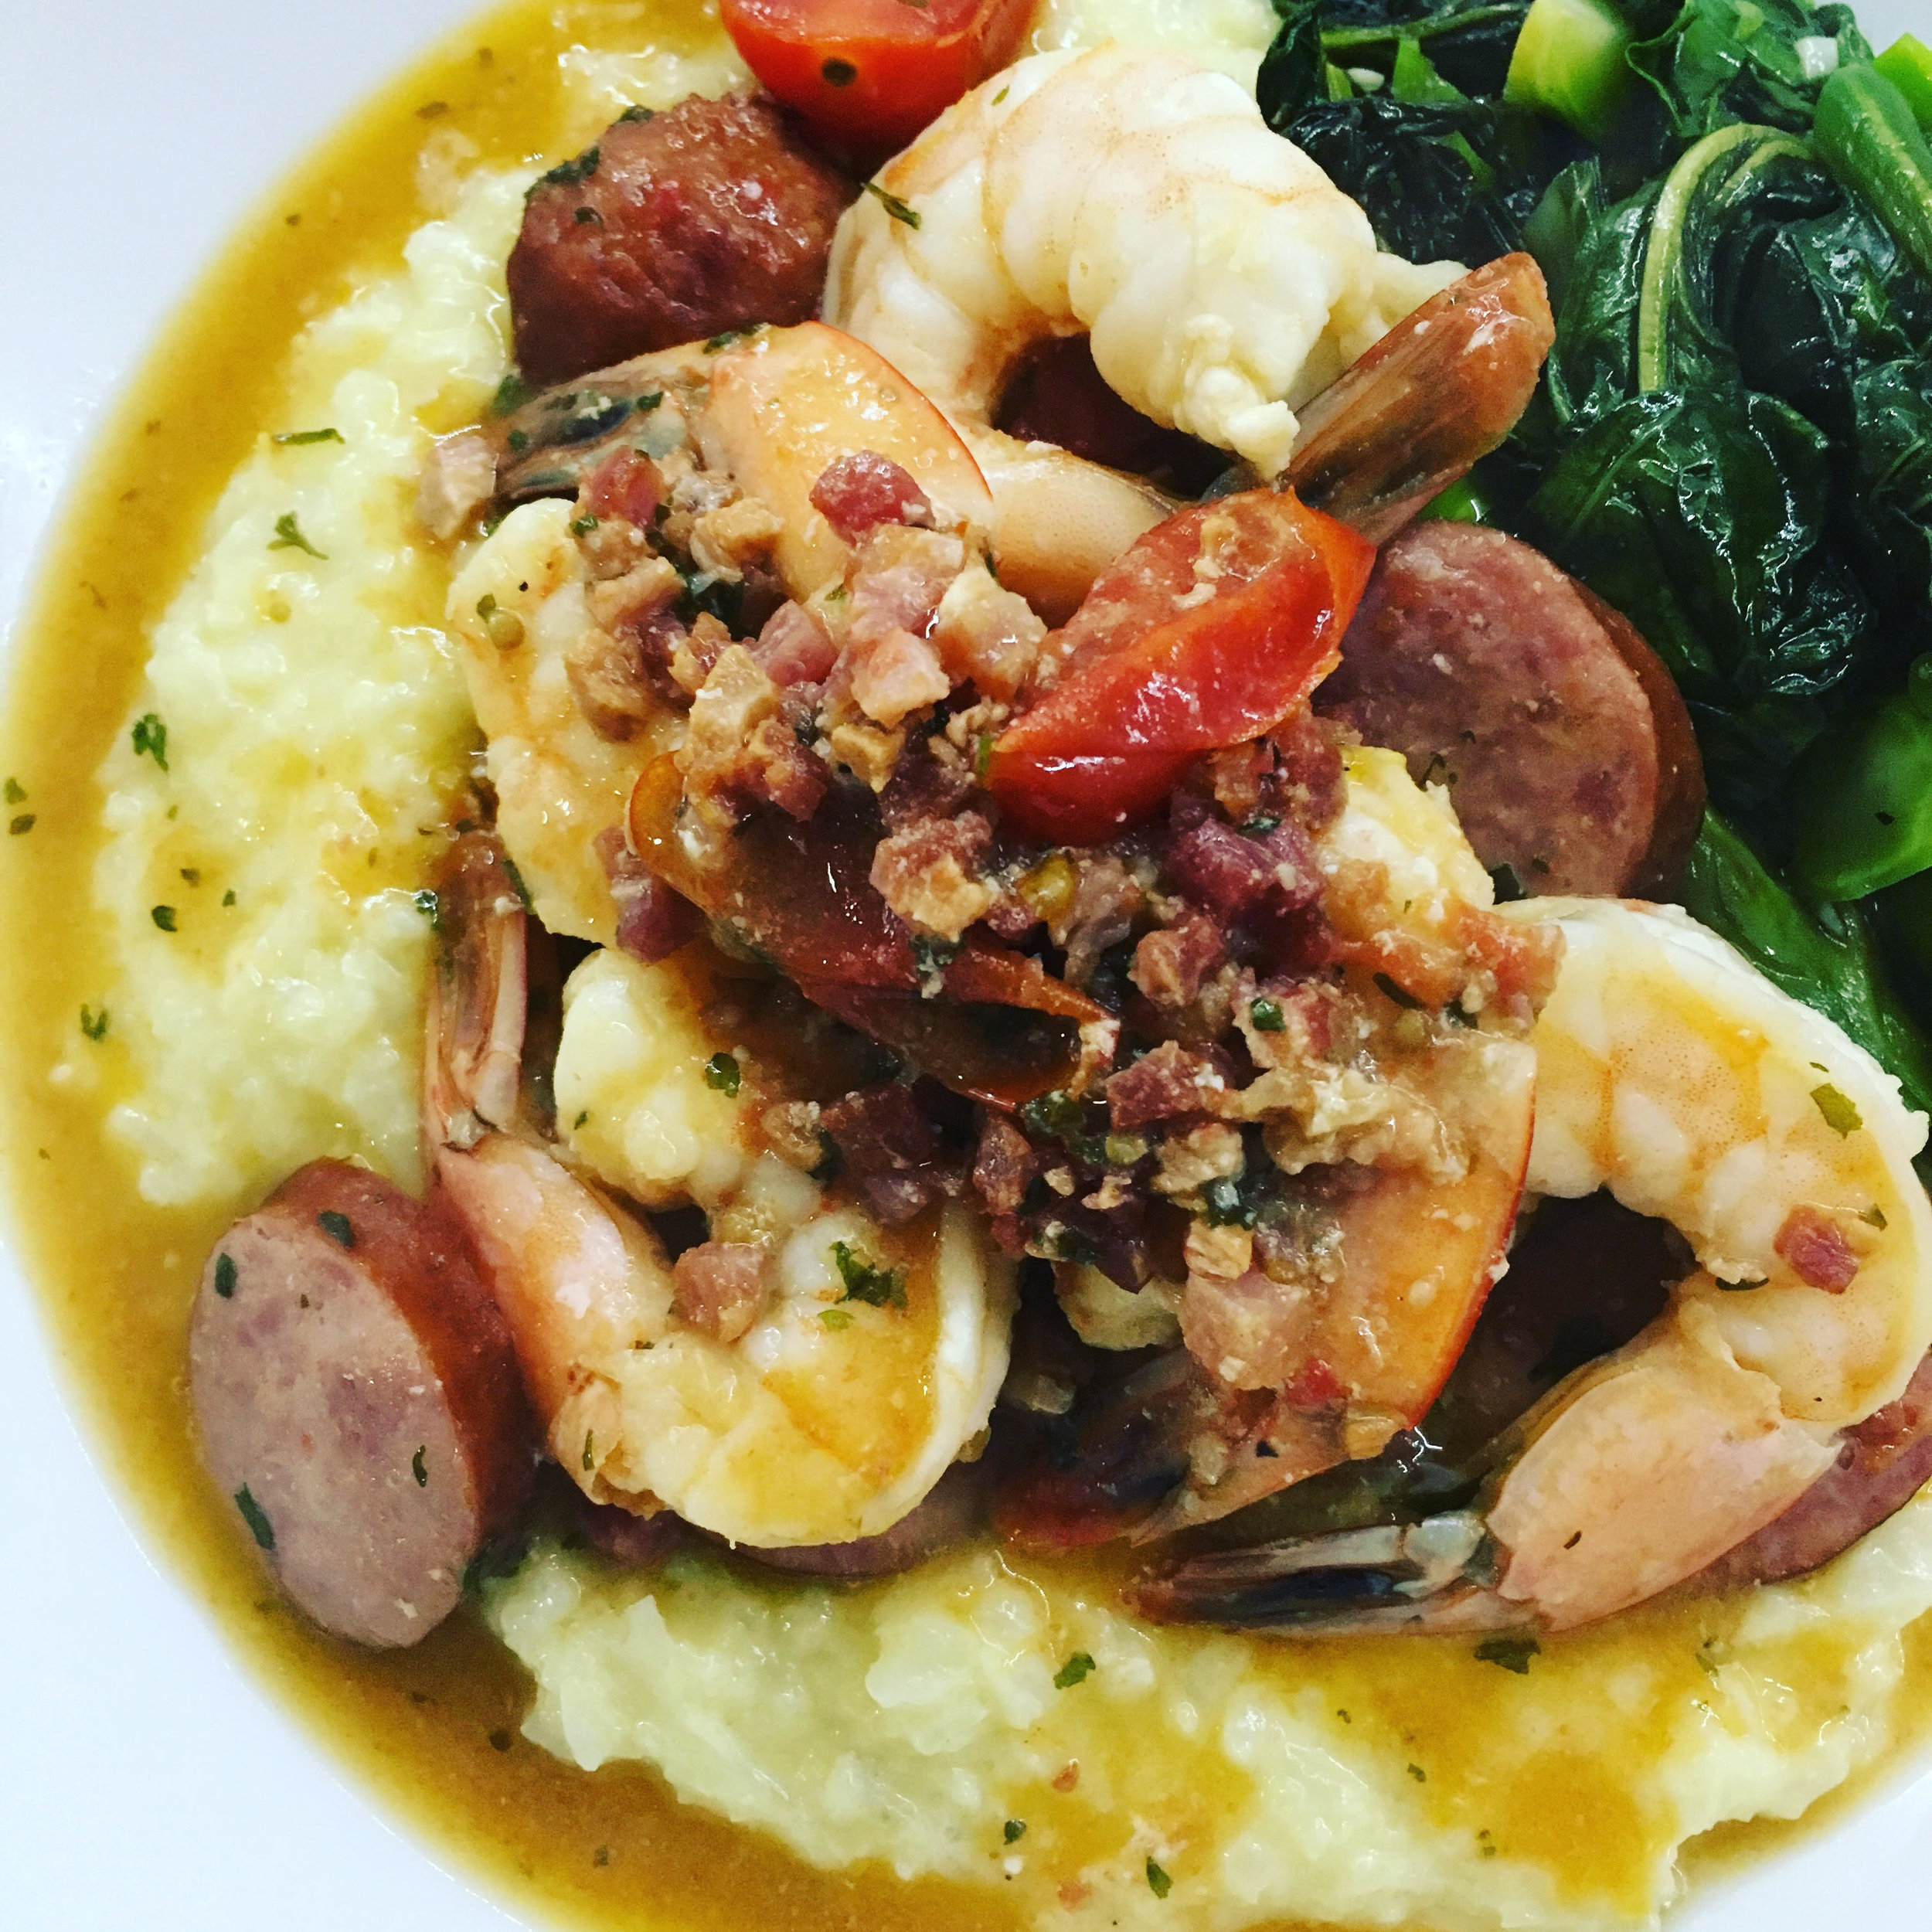 Shrimp and "Grits"